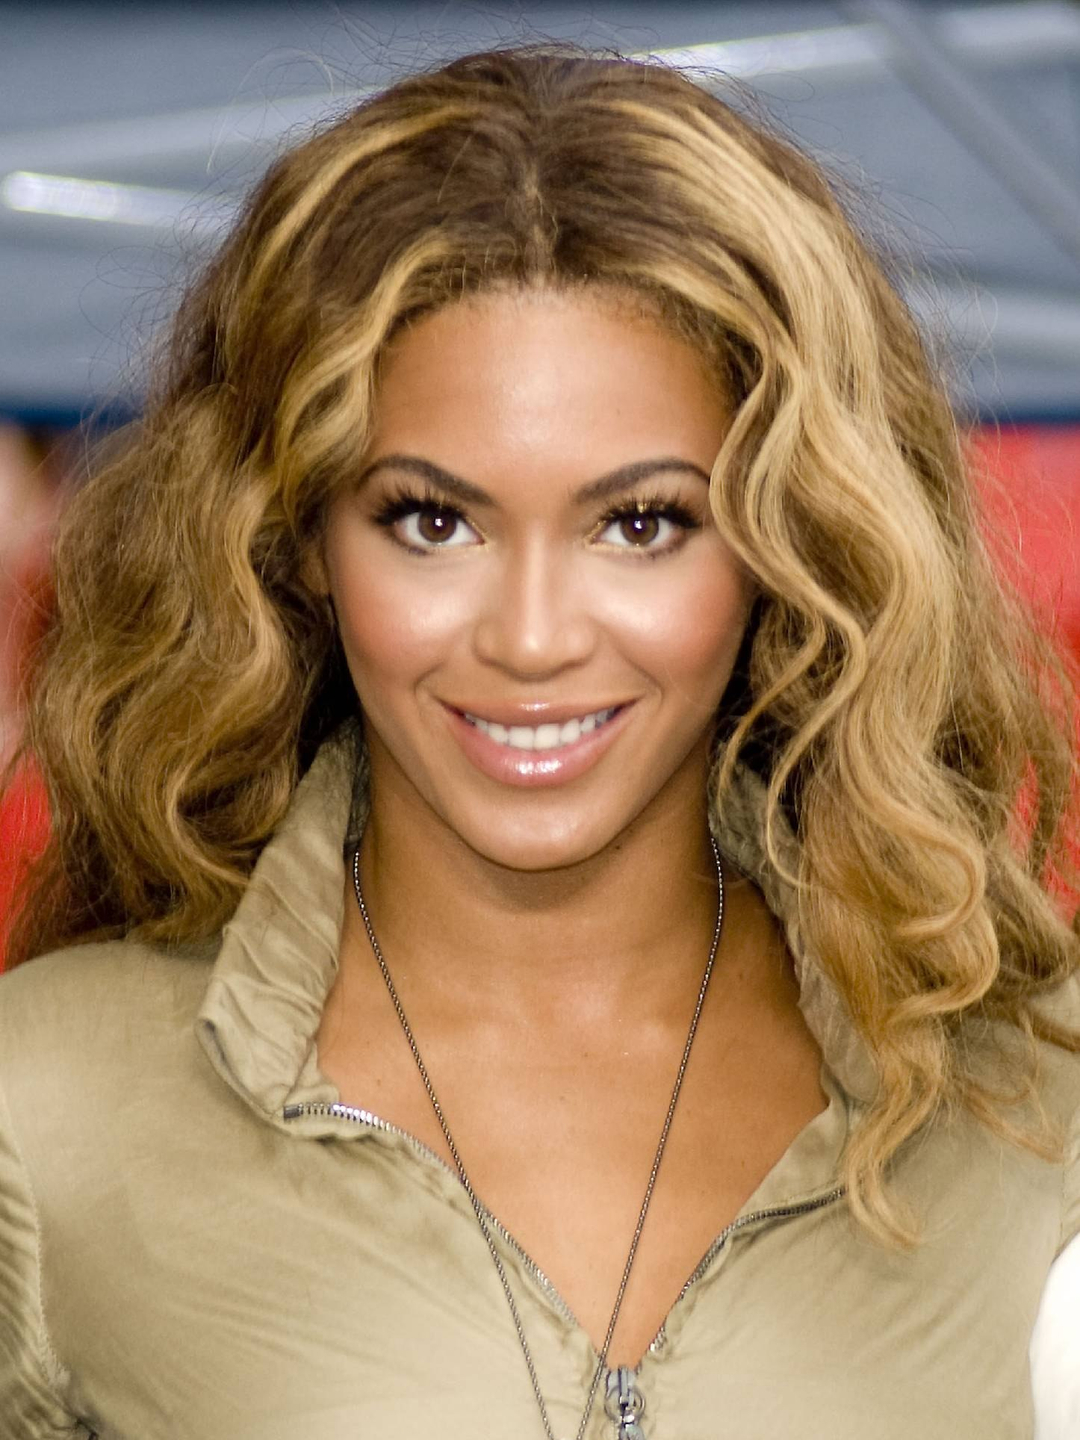 Beyonce appearance